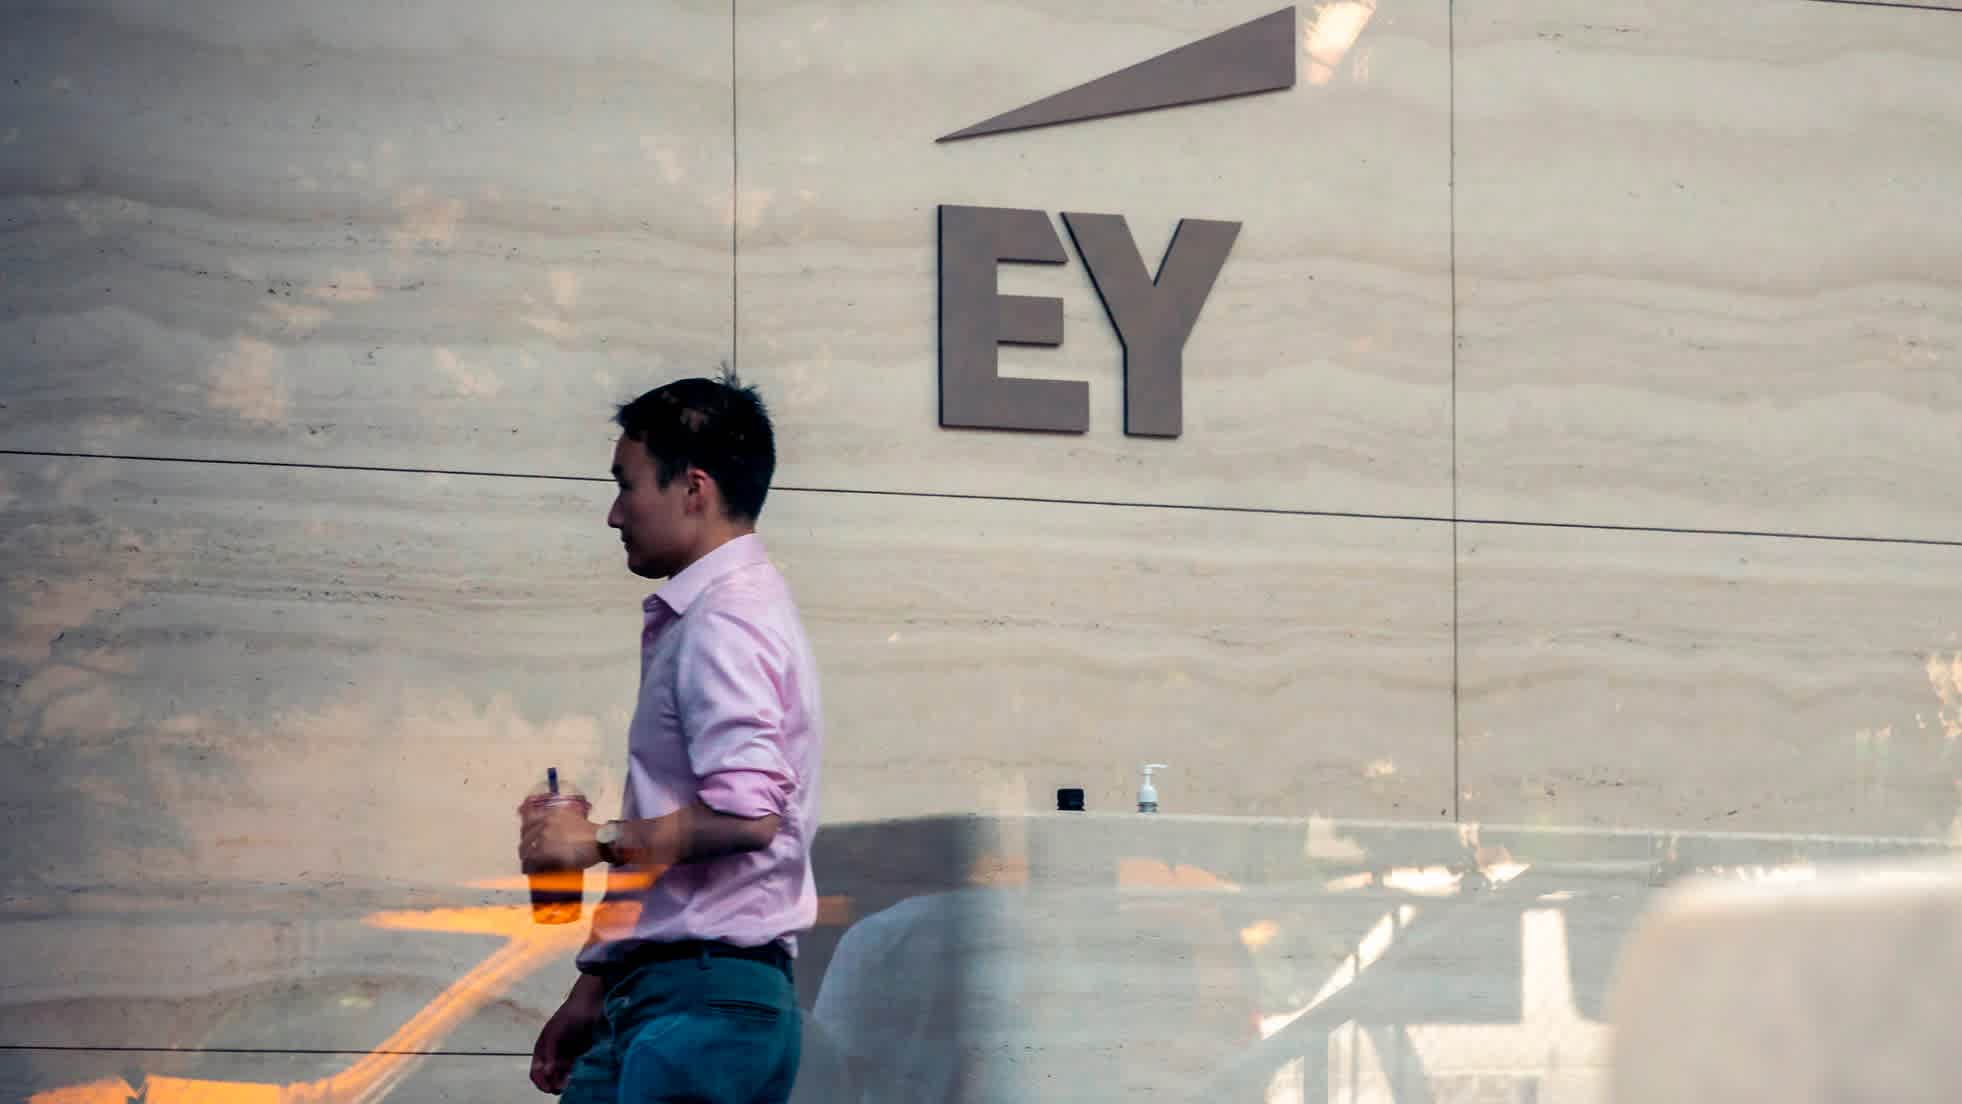 EY US reshuffles leadership following failure of spin-off plan